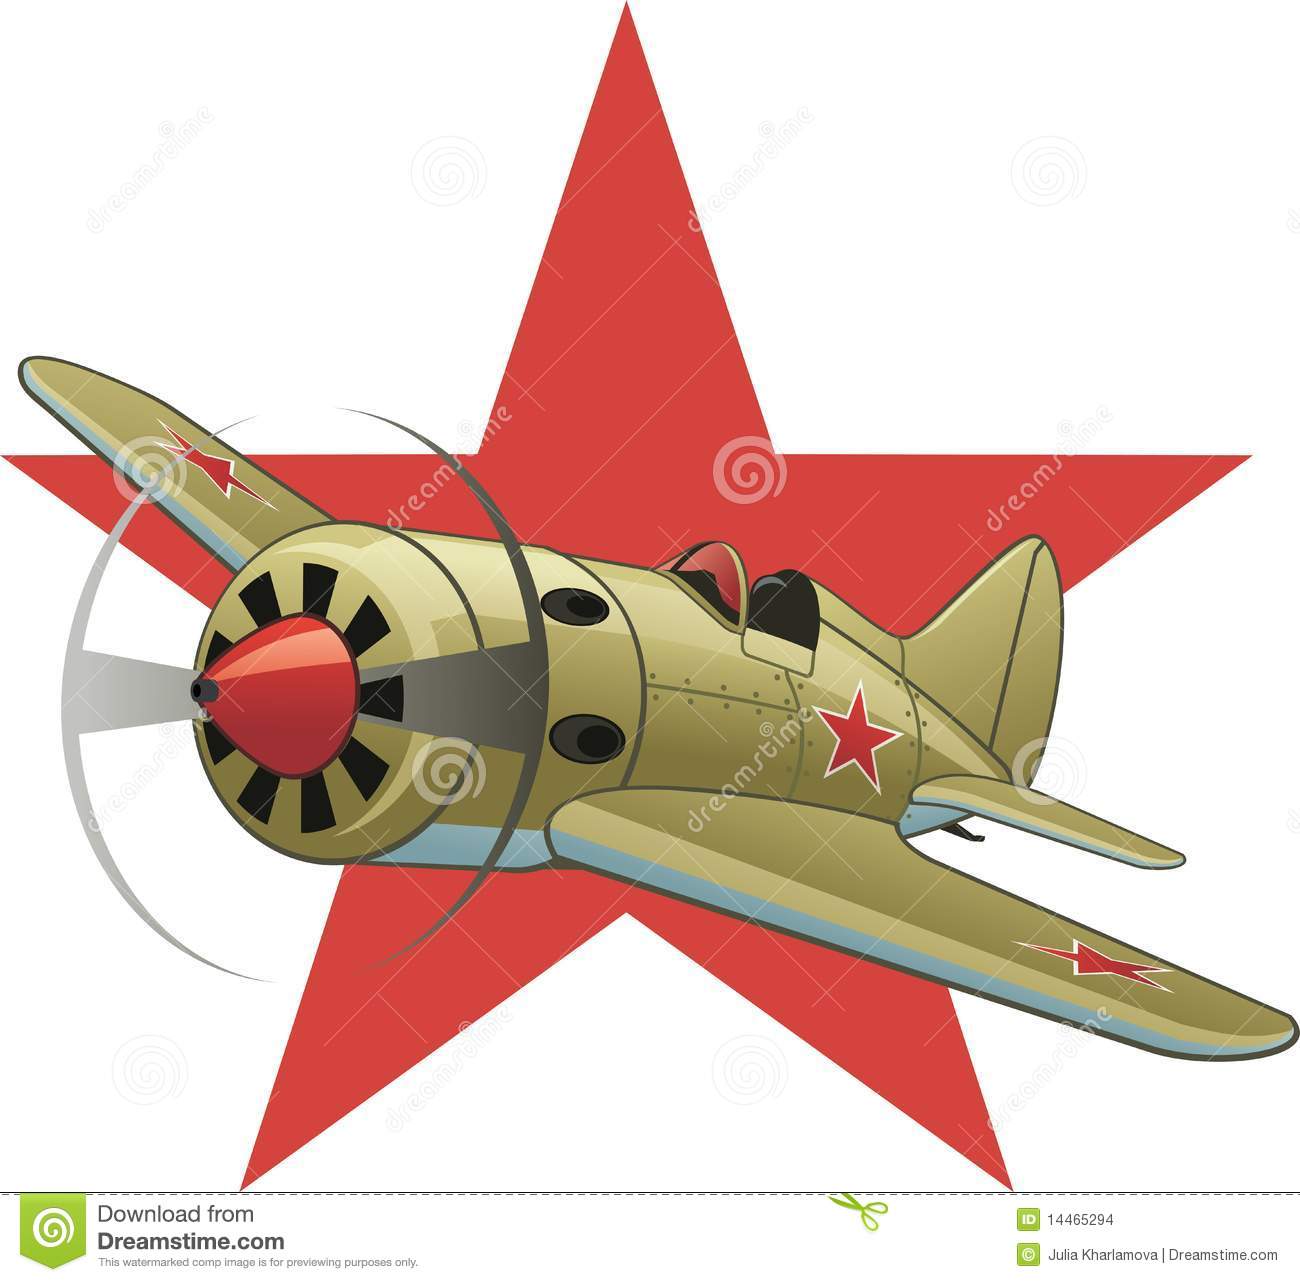 Russian Fighter Plane Of The Early Ww2 Era On The Soviet Red Star    